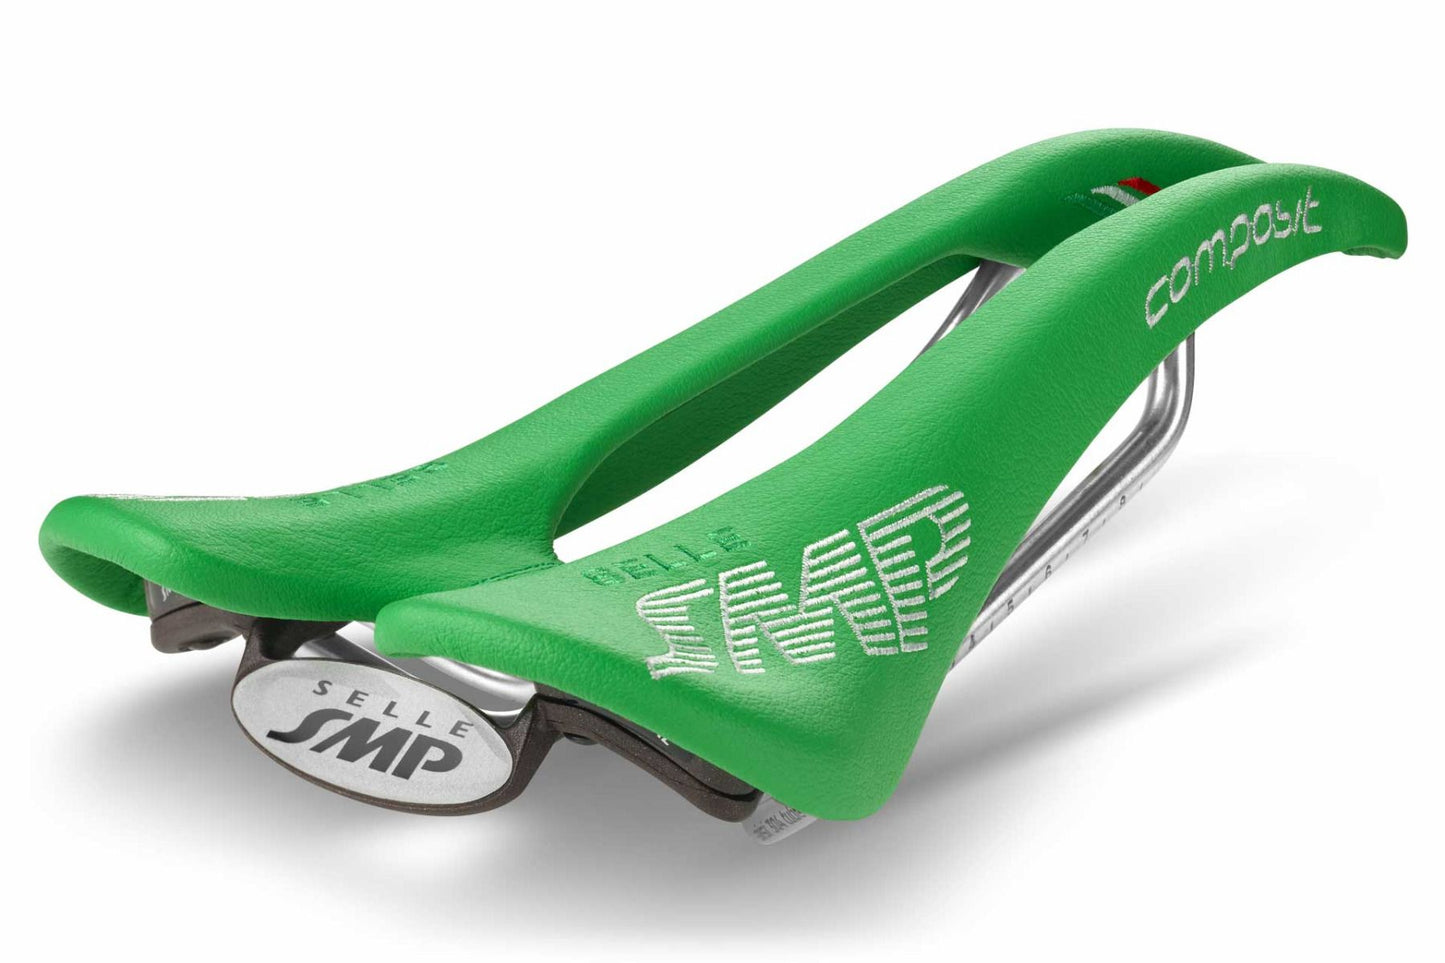 Selle SMP Composit Saddle with Steel Rails (Green)